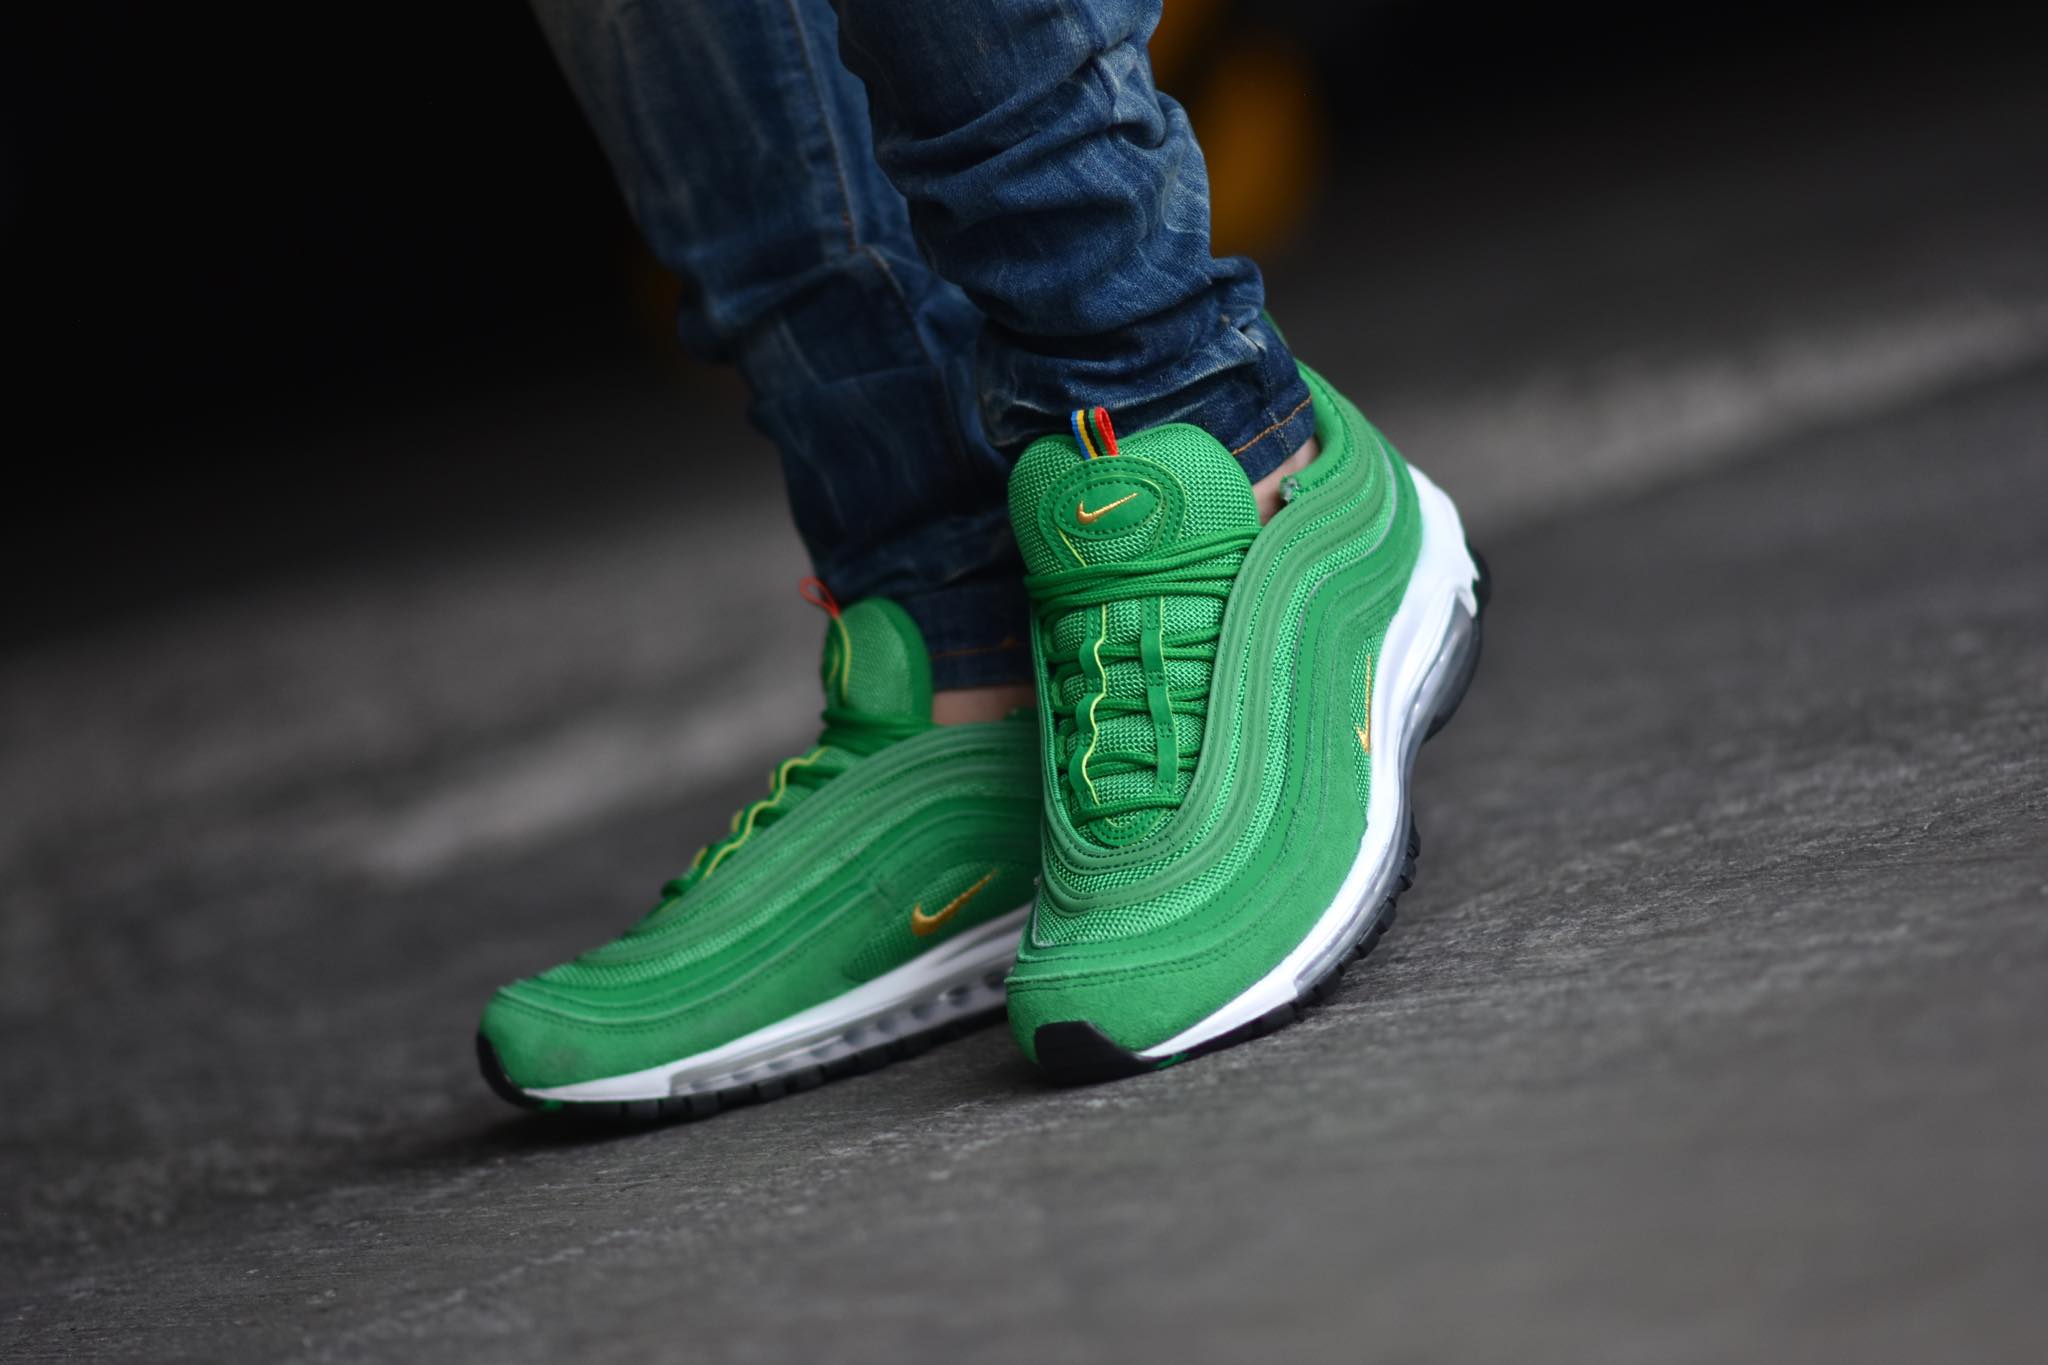 Science Enrichment I will be strong air max 97 qs lucky green Hot Sale - OFF 60%